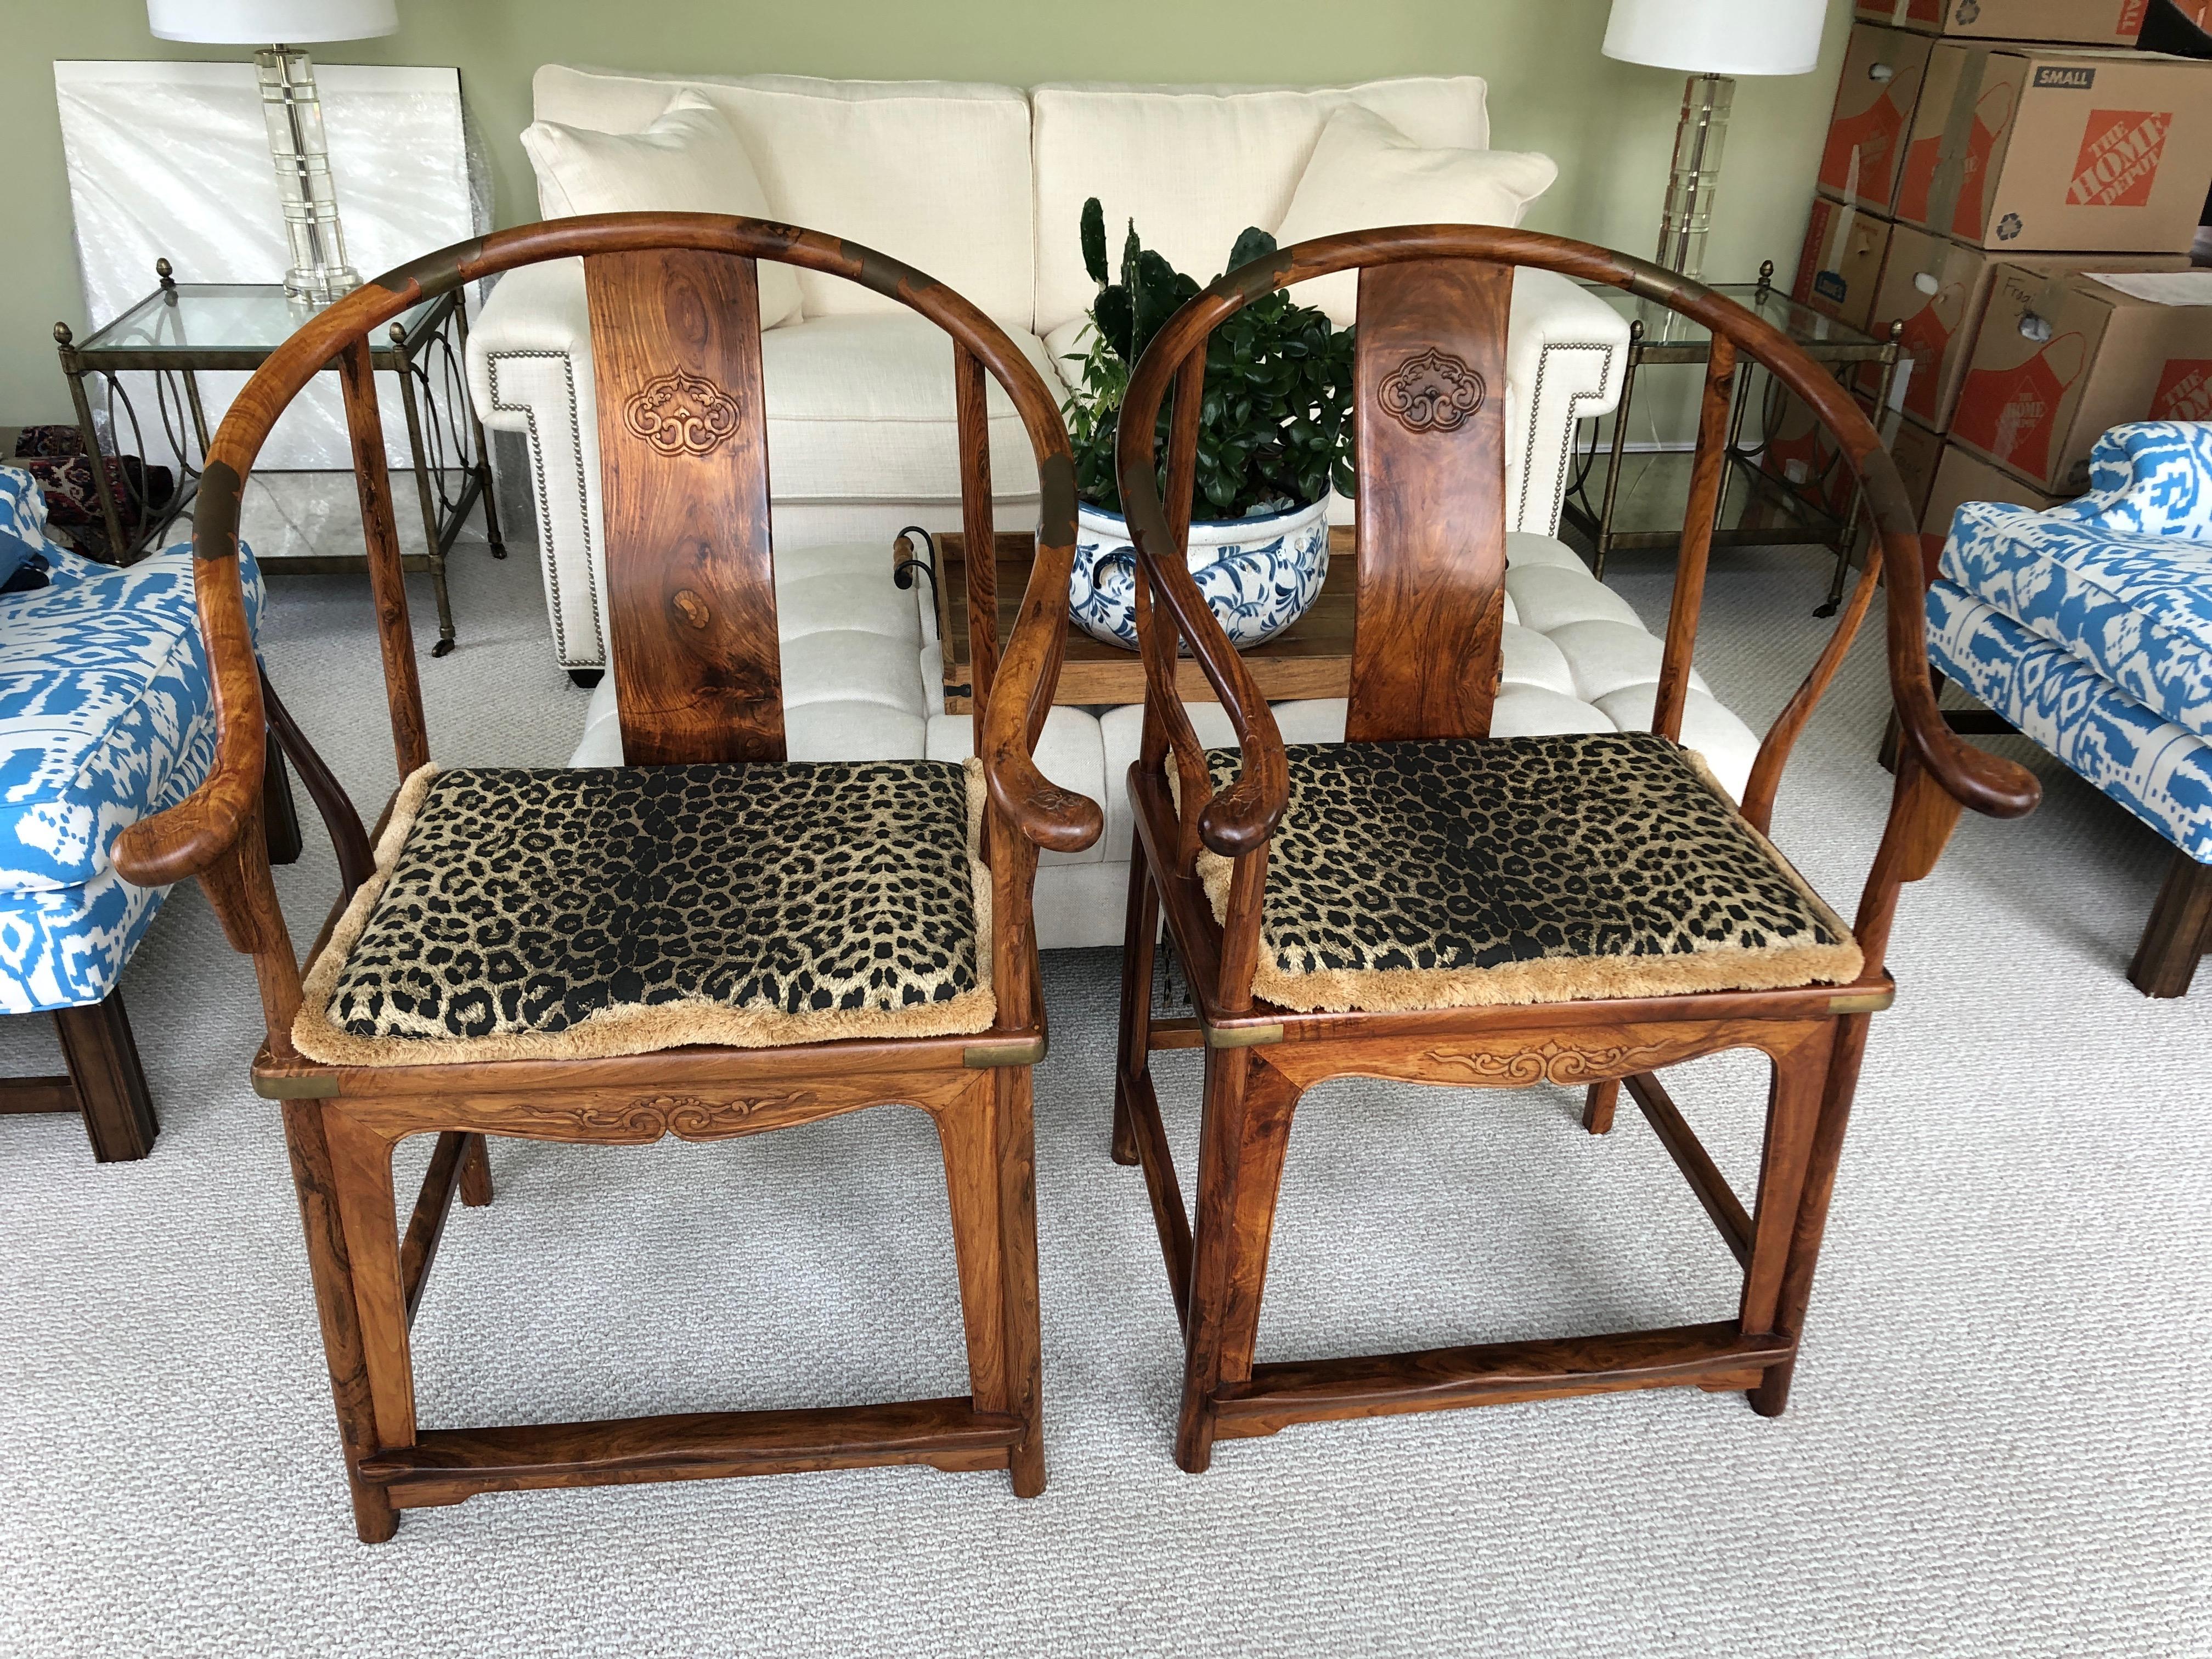 Marvellous pair of Chinese Qing dynasty horseshoe armchairs having gorgeous grained Huanghuali wood, curvy back rail and arms that form a continuous semi circle. Coupled with tapered S-curved shaped side posts, on the back splats there is a relief